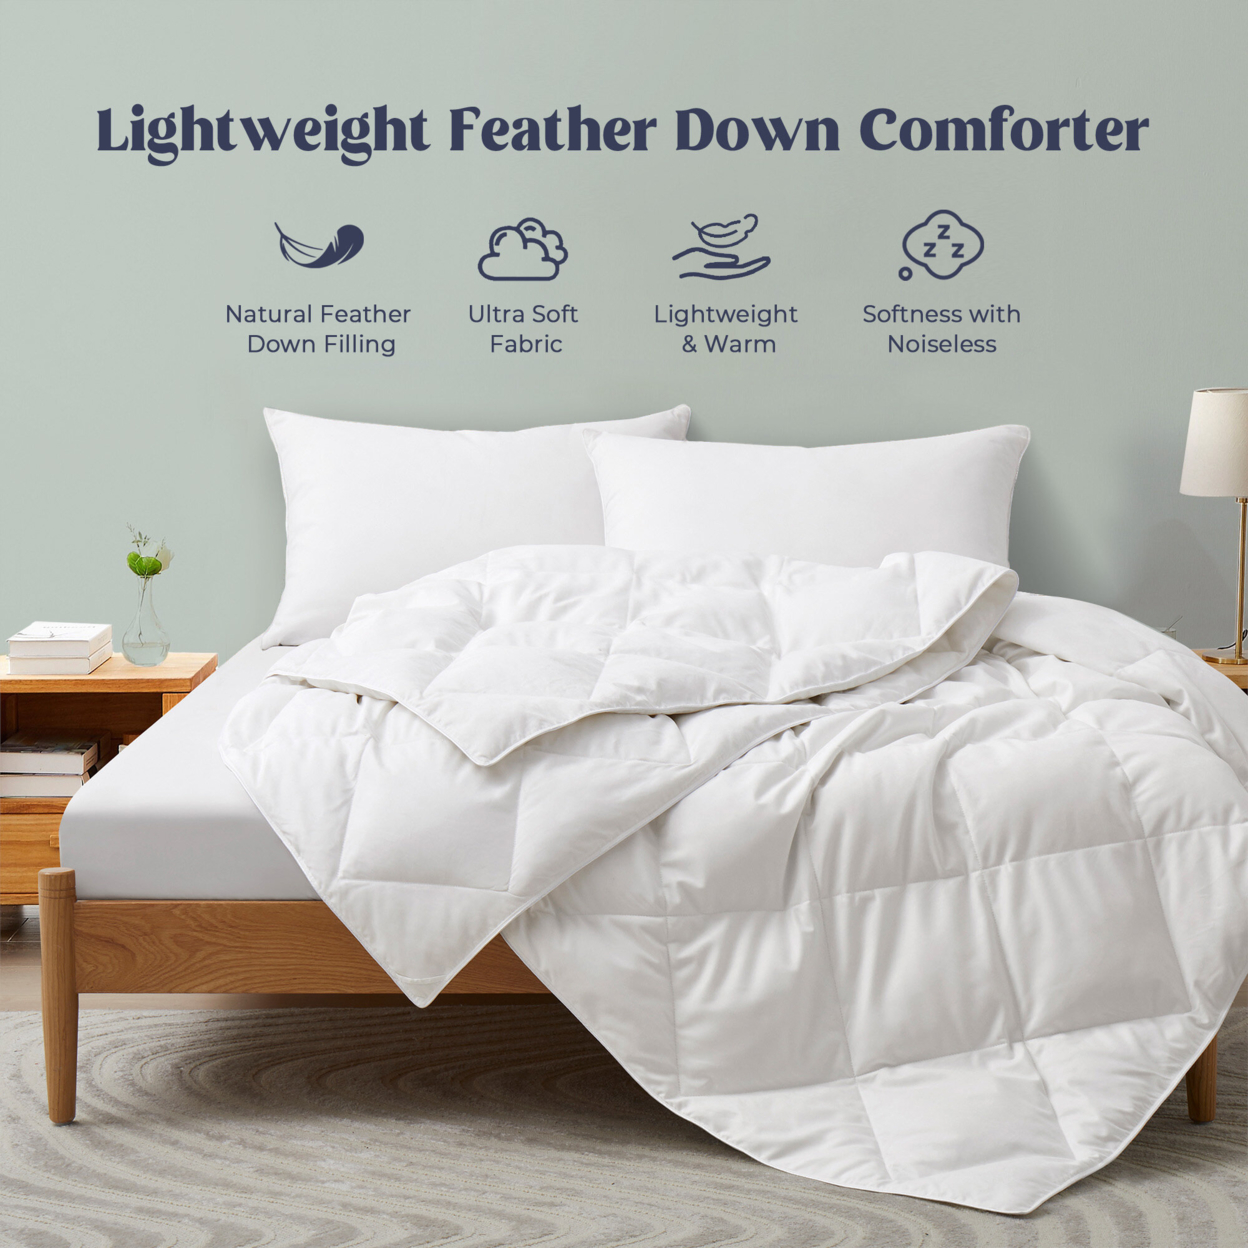 White Goose Feather Fiber And Down Comforter-Lightweight&Medium Weight, Sleep Soundly With Noiseless - Lightweight, California King